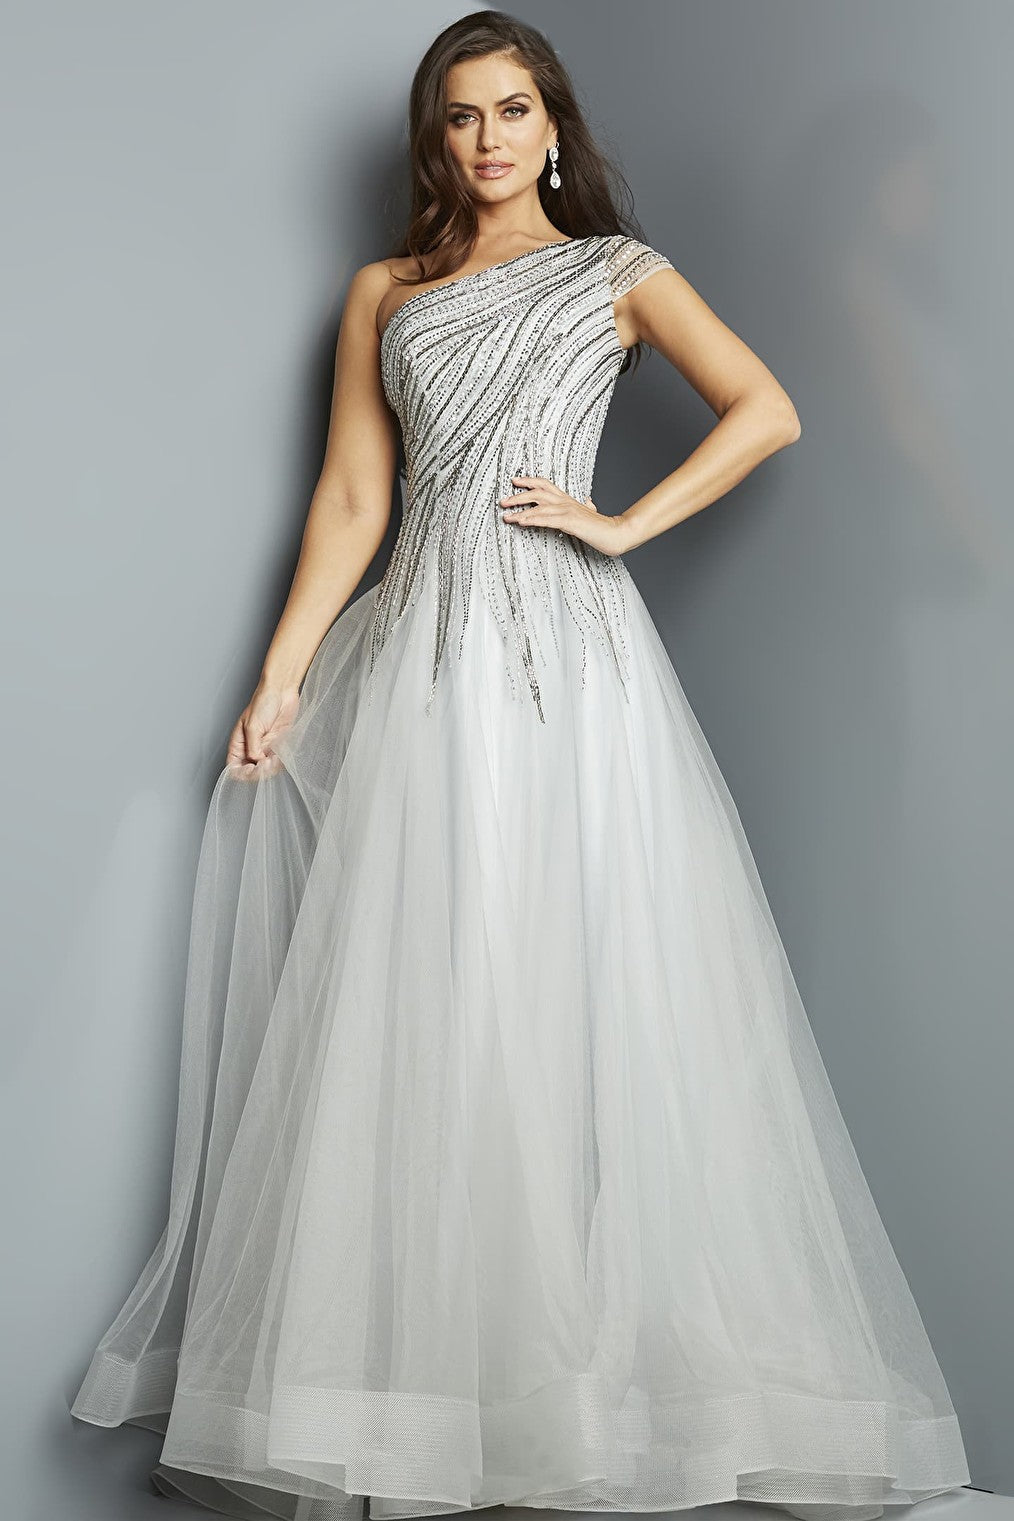 silver tulle dress 23042